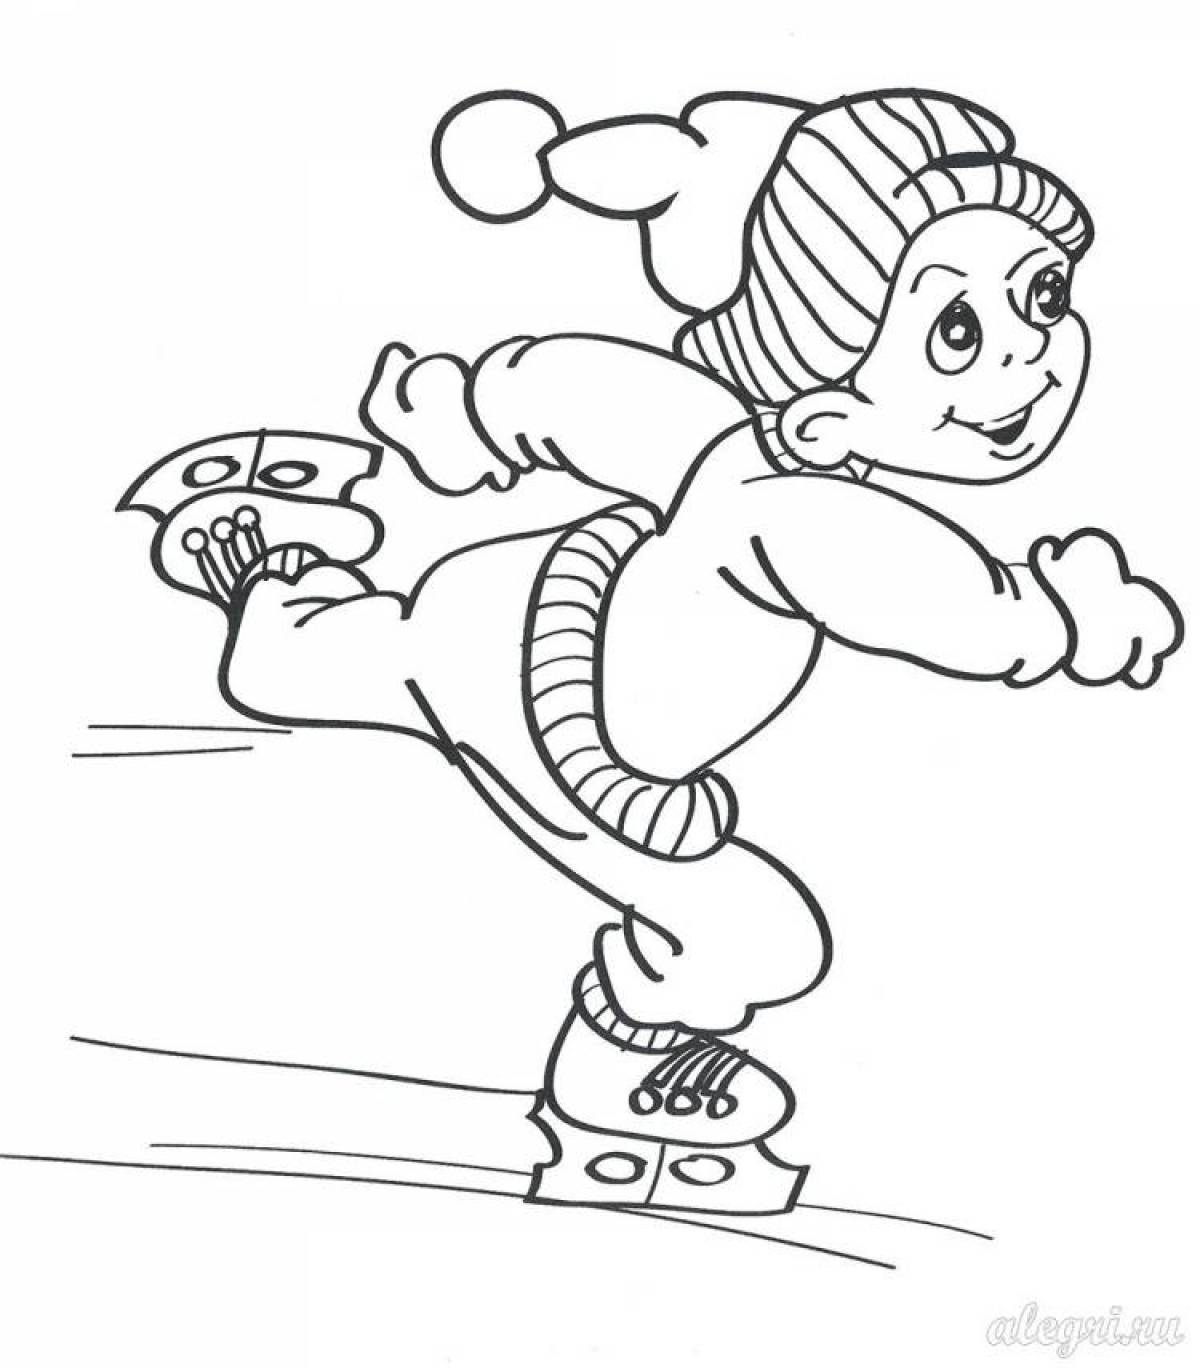 Edge of playtime babys coloring page